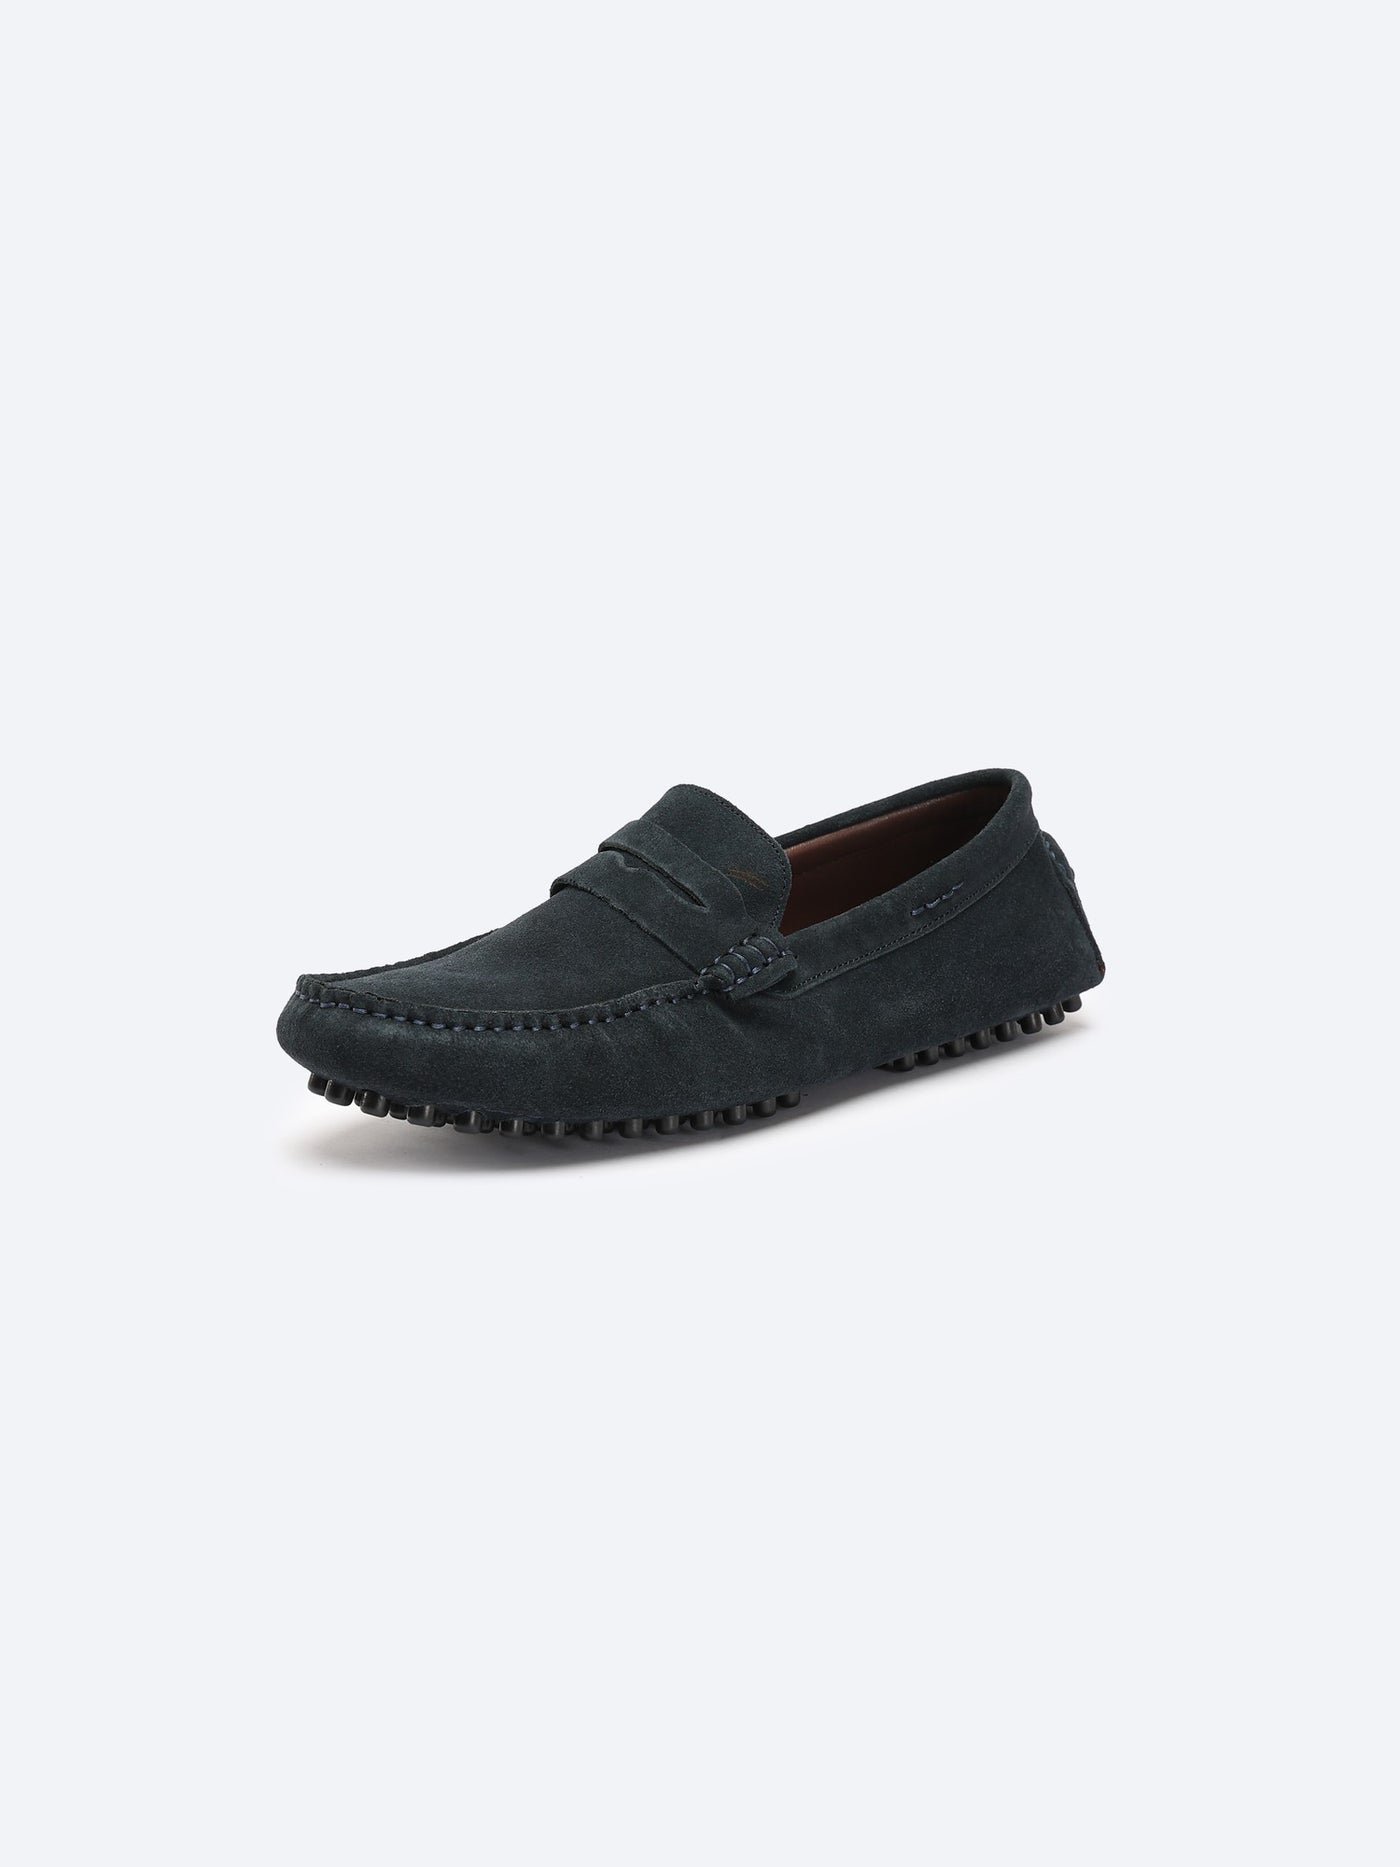 Loafers - Slip-on - Suede